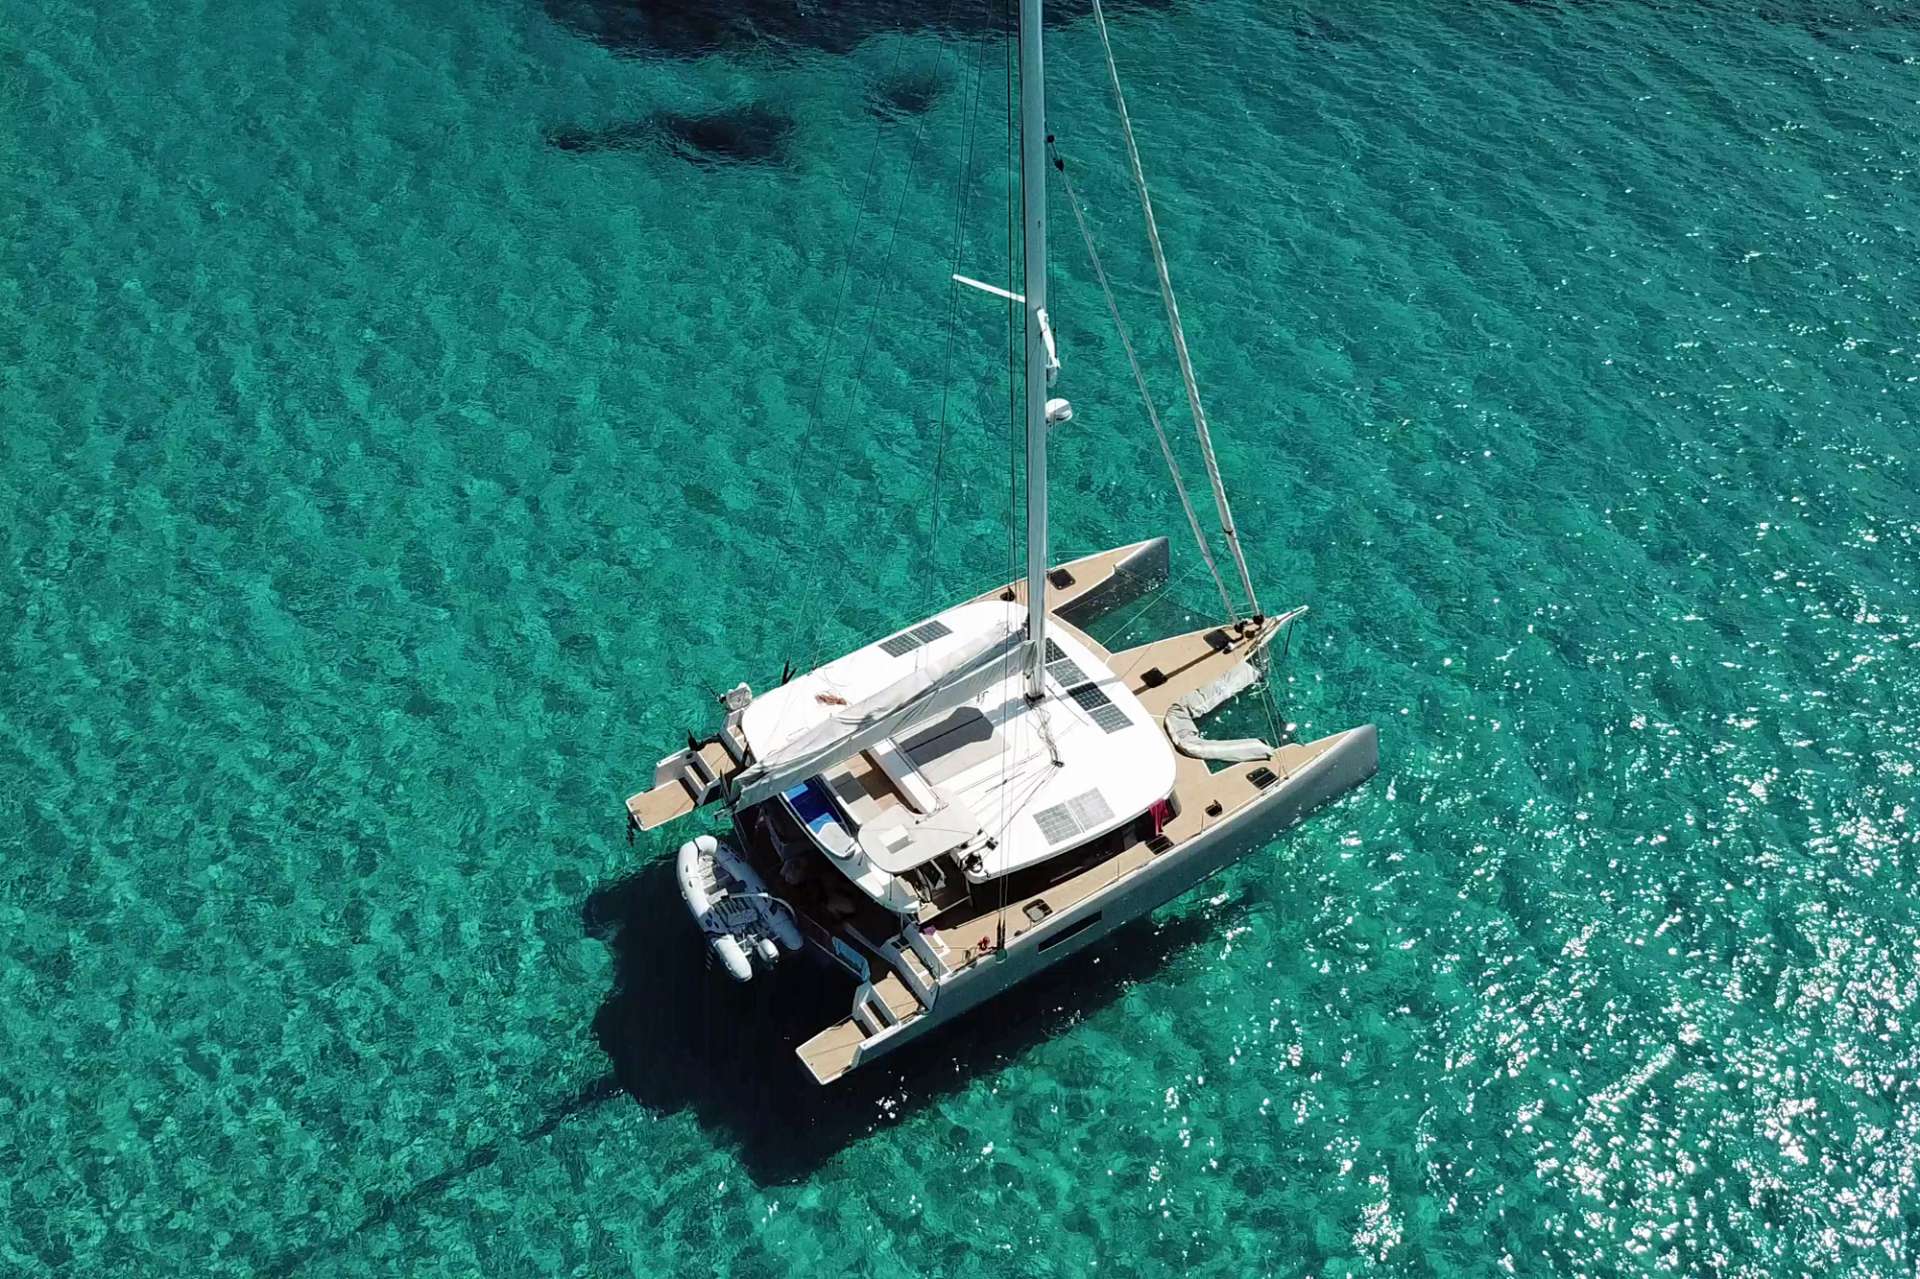 TRILOGY Yacht Charter - check out those trampolines!